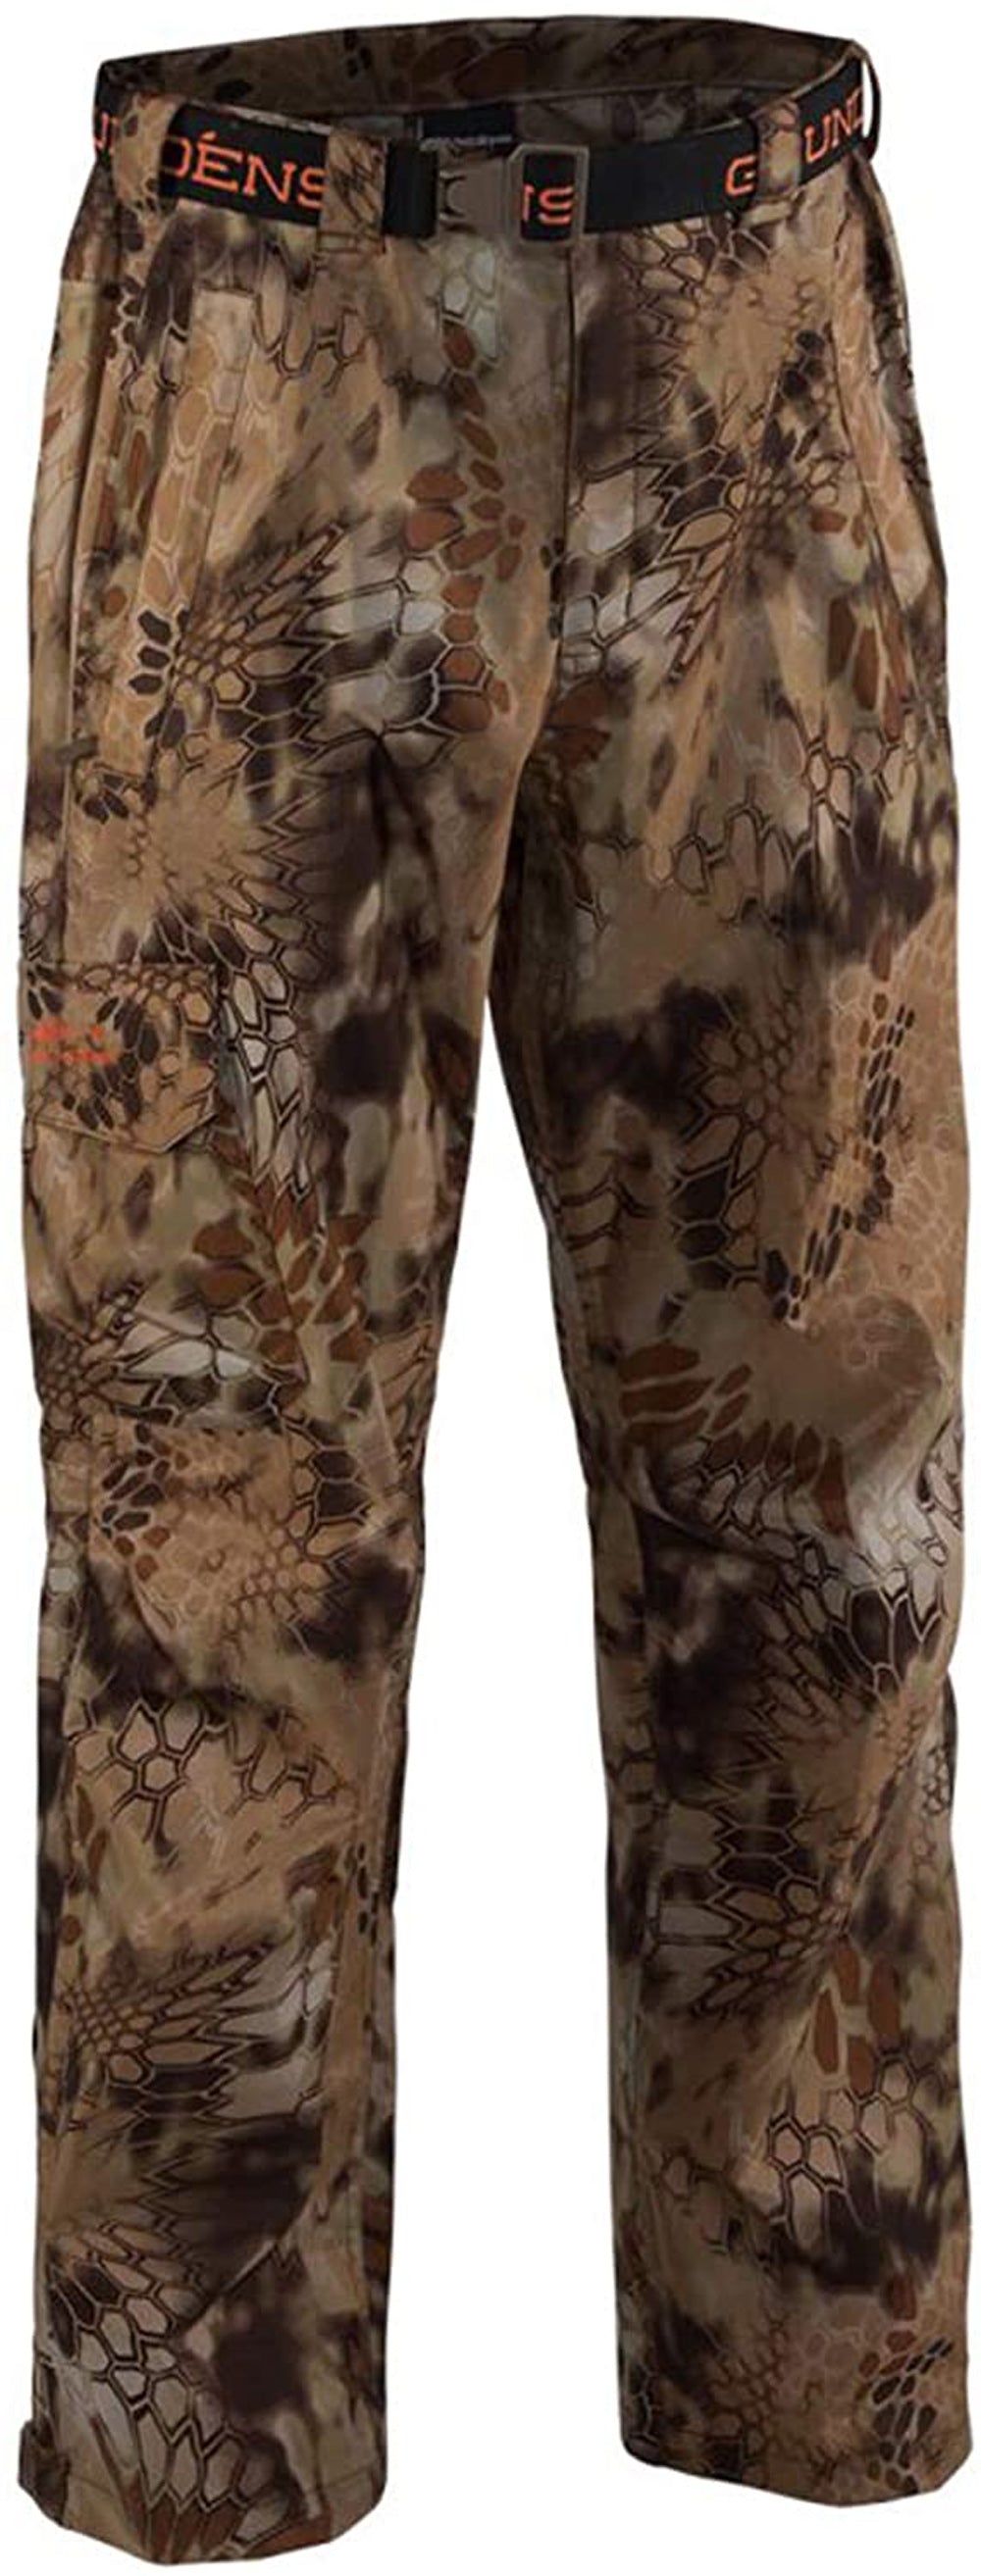 Weather Watch Trouser in Kryptek Highlander color from the front view